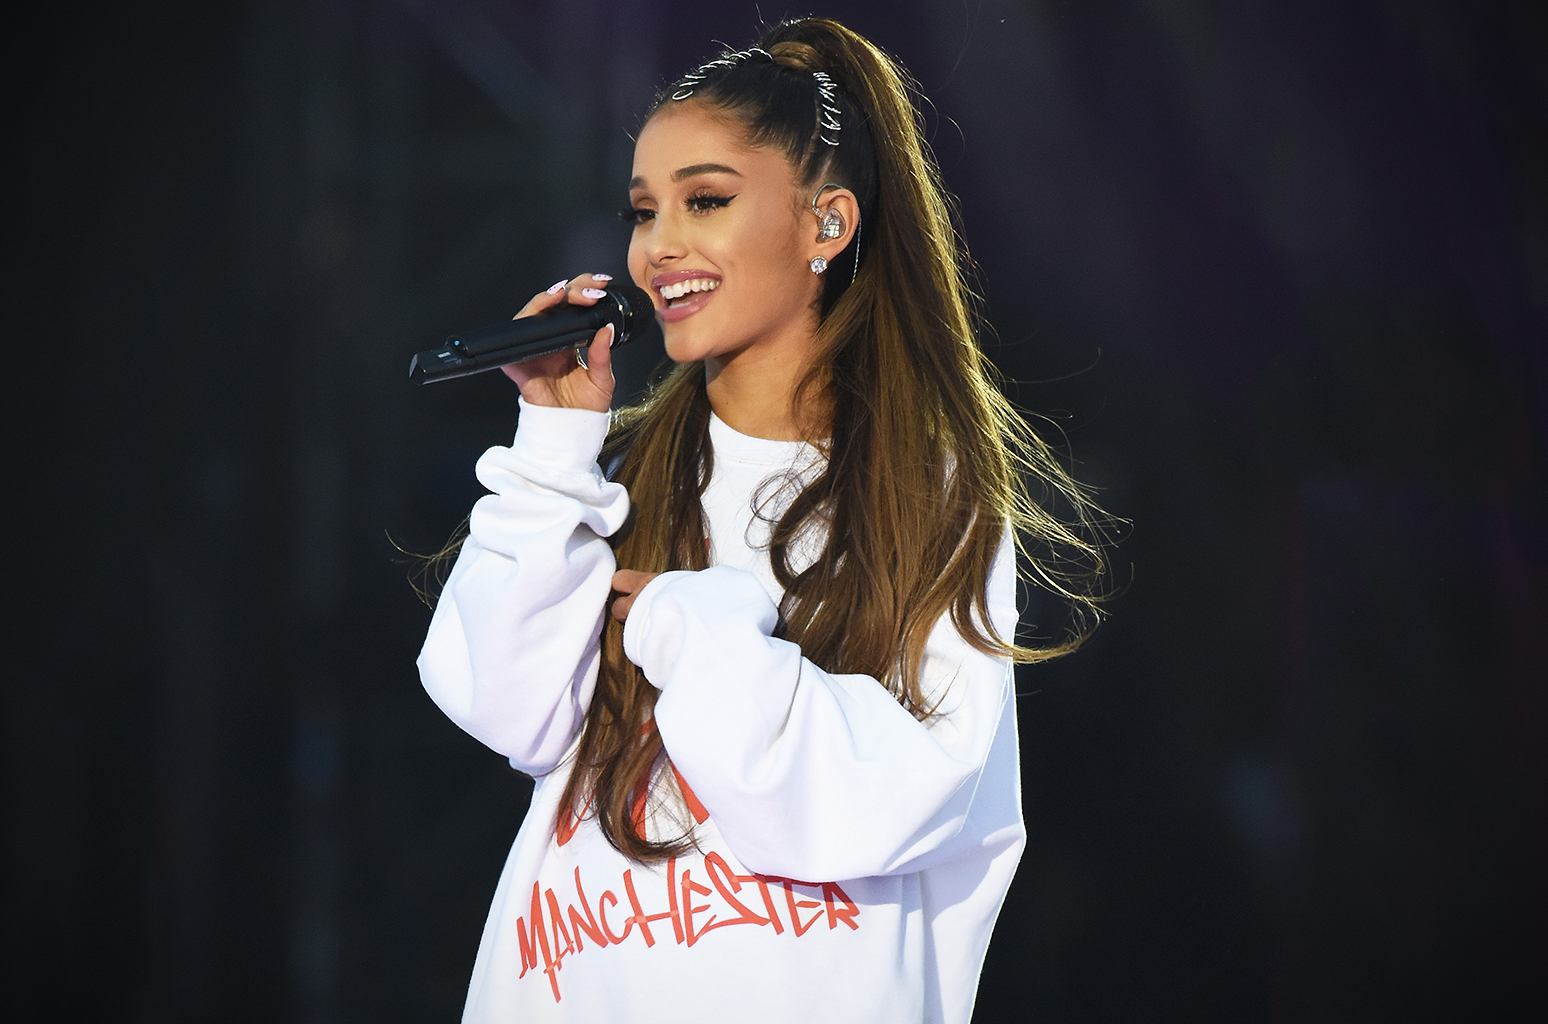 MANCHESTER, ENGLAND - JUNE 04:  NO SALES, free for editorial use. In this handout provided by 'One Love Manchester' benefit concert Ariana Grande performs on stage on June 4, 2017 in Manchester, England. Donate at www.redcross.org.uk/love  (Photo by Getty Images/Dave Hogan for One Love Manchester)